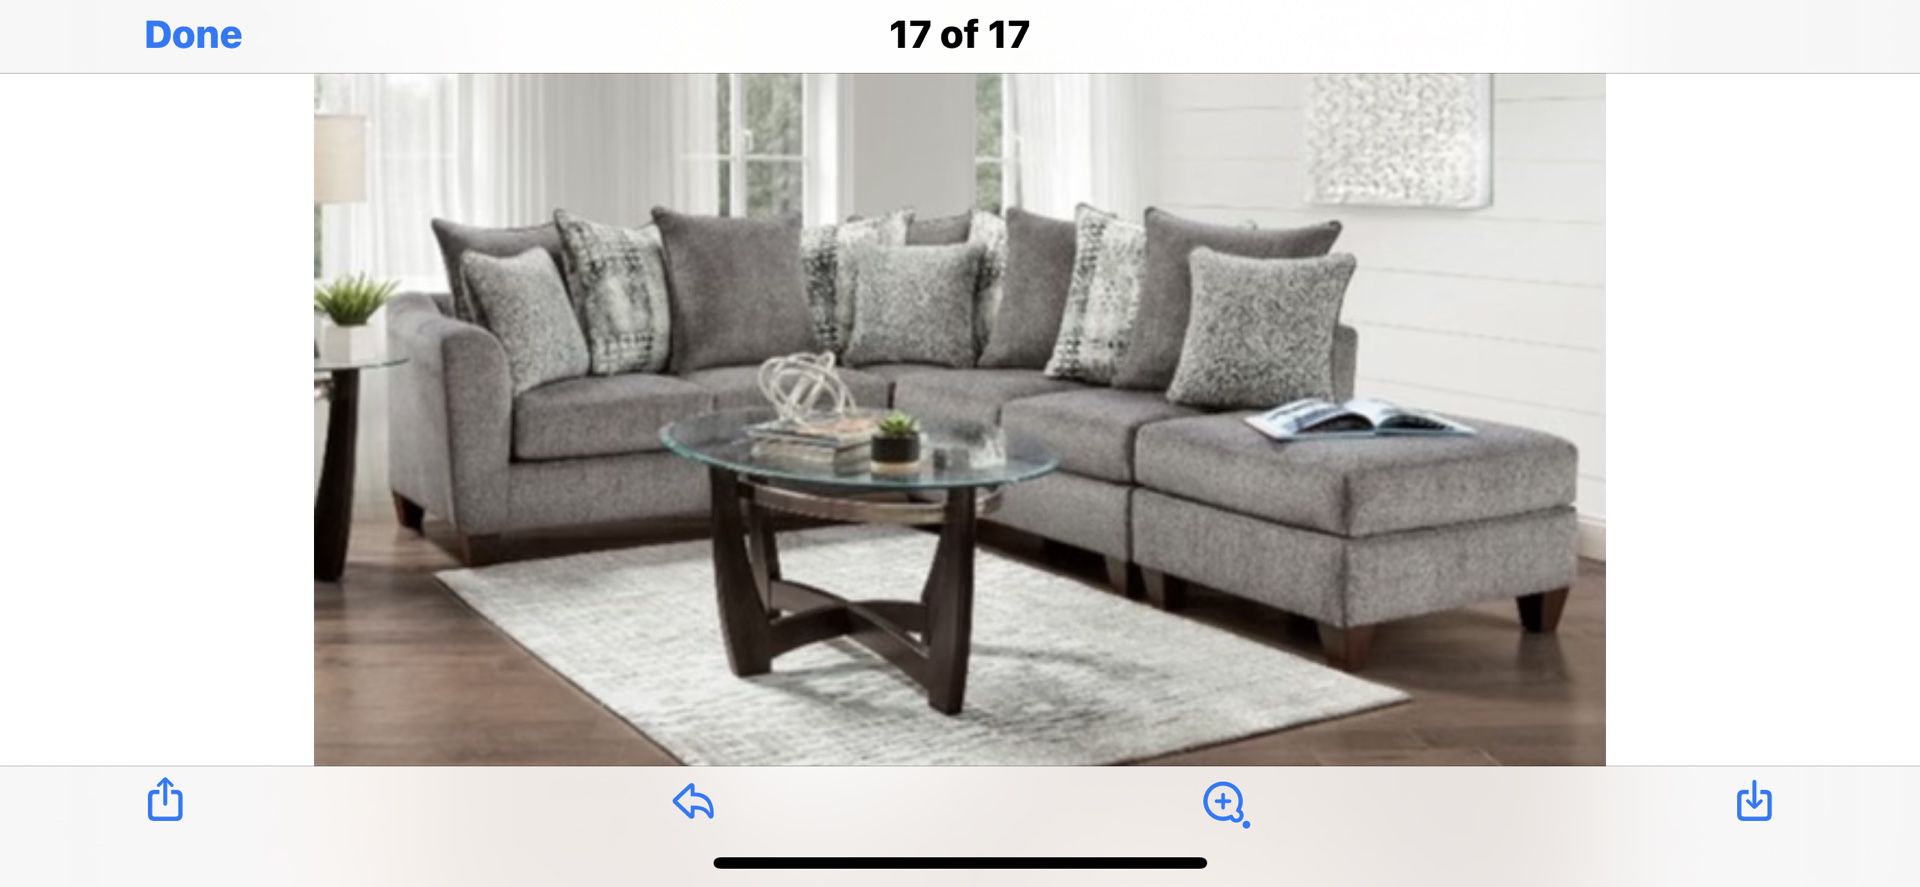 Brand new sectional hurry only one left to sell came in by mistake 1299